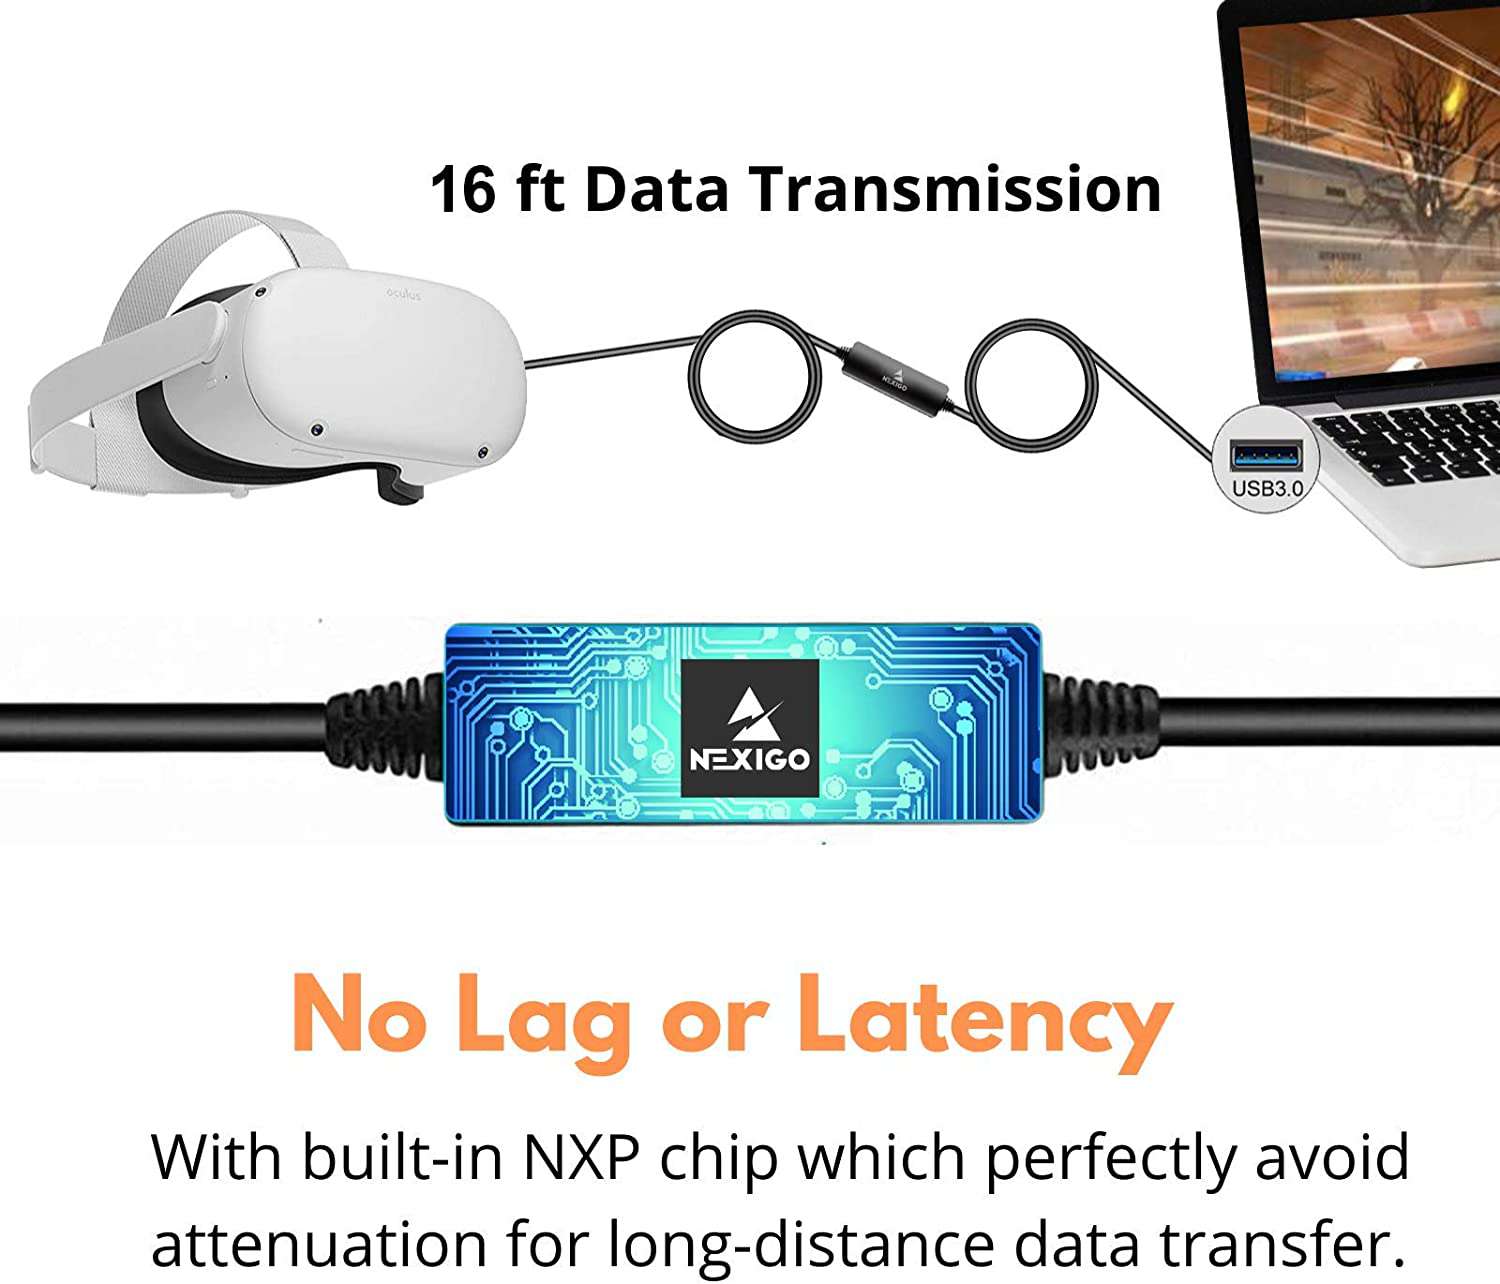 16ft cable with NXP chip for lag-free long-distance data transfer.